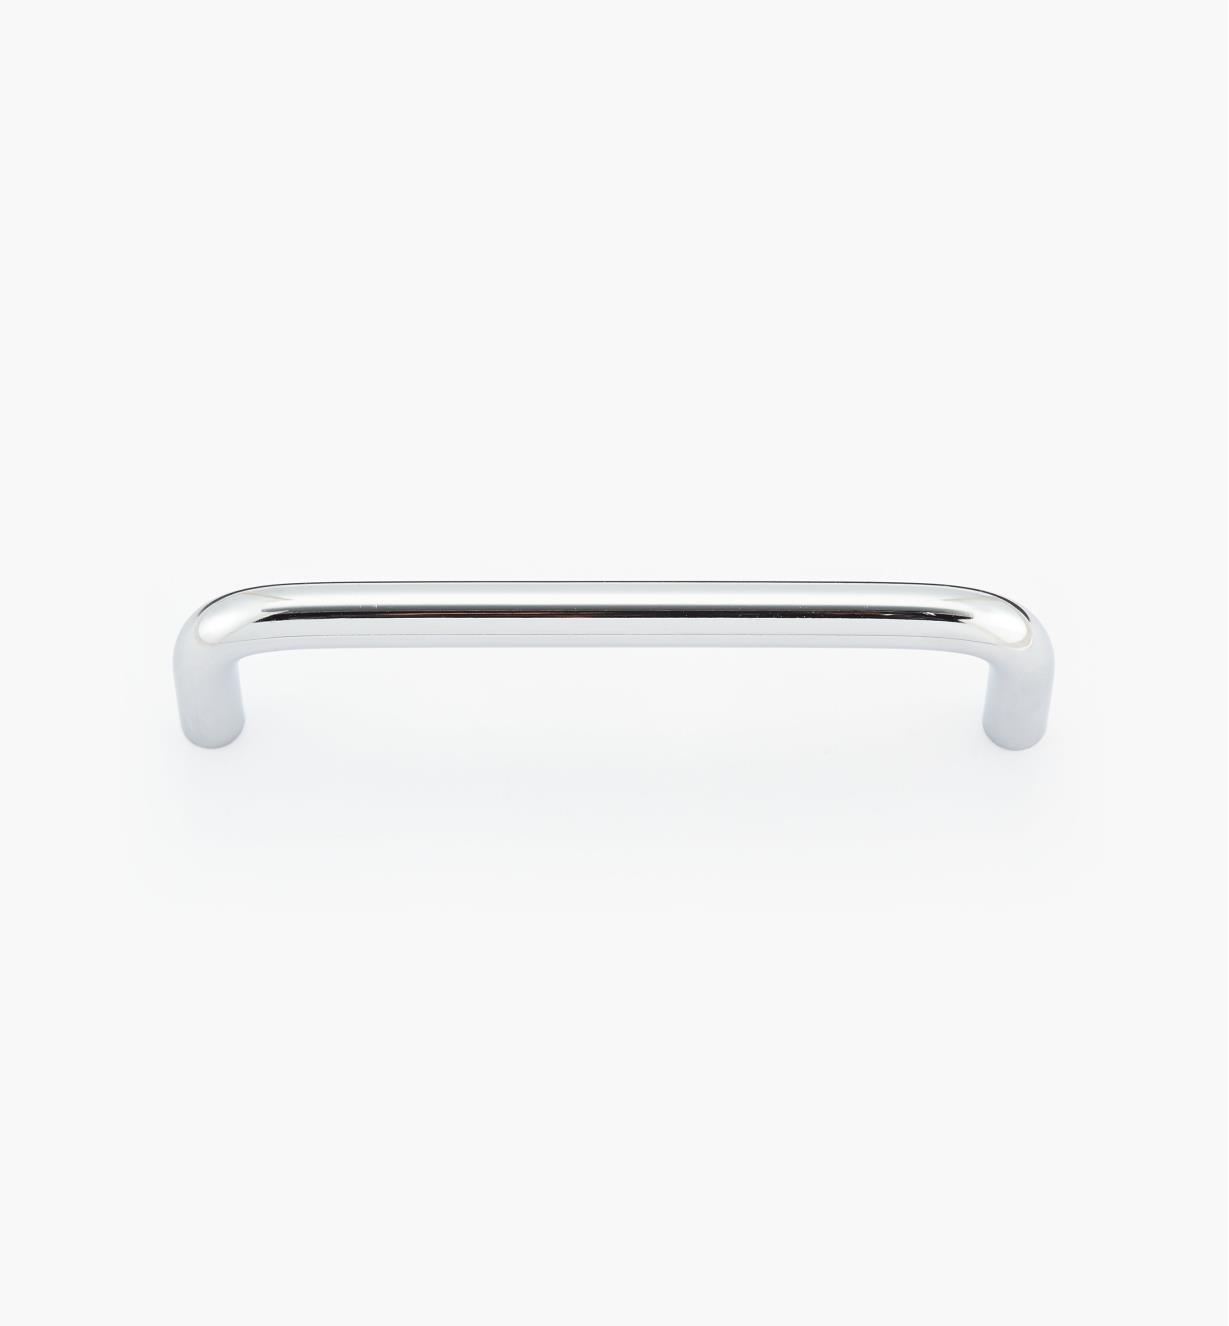 01W7703 - 96mm Chrome Plated Wire Pull